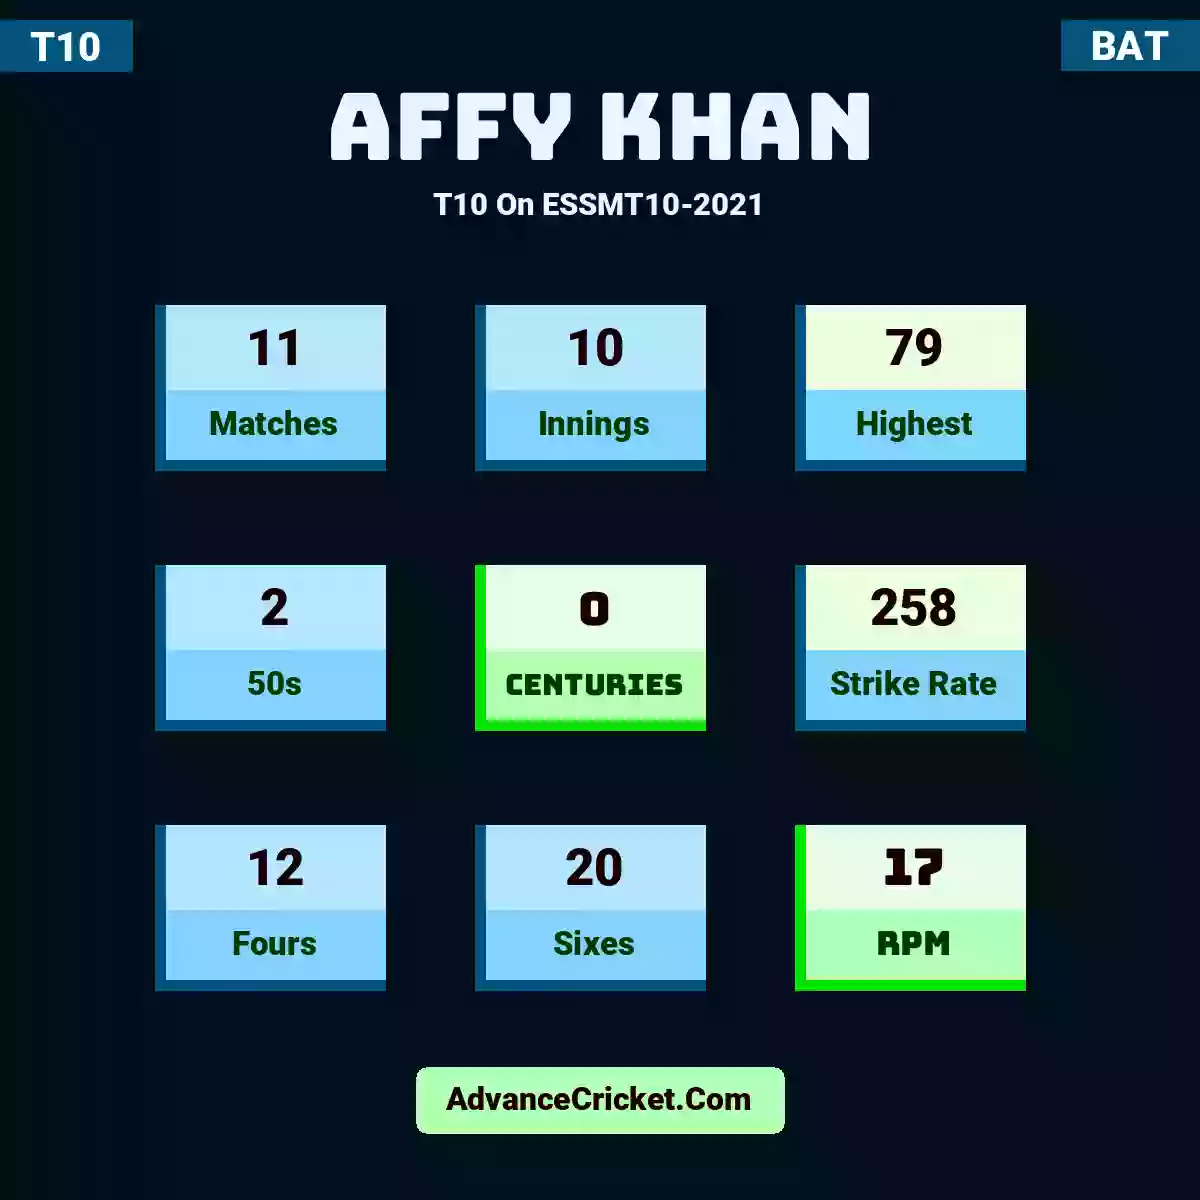 Affy Khan T10  On ESSMT10-2021, Affy Khan played 11 matches, scored 79 runs as highest, 2 half-centuries, and 0 centuries, with a strike rate of 258. A.Khan hit 12 fours and 20 sixes, with an RPM of 17.